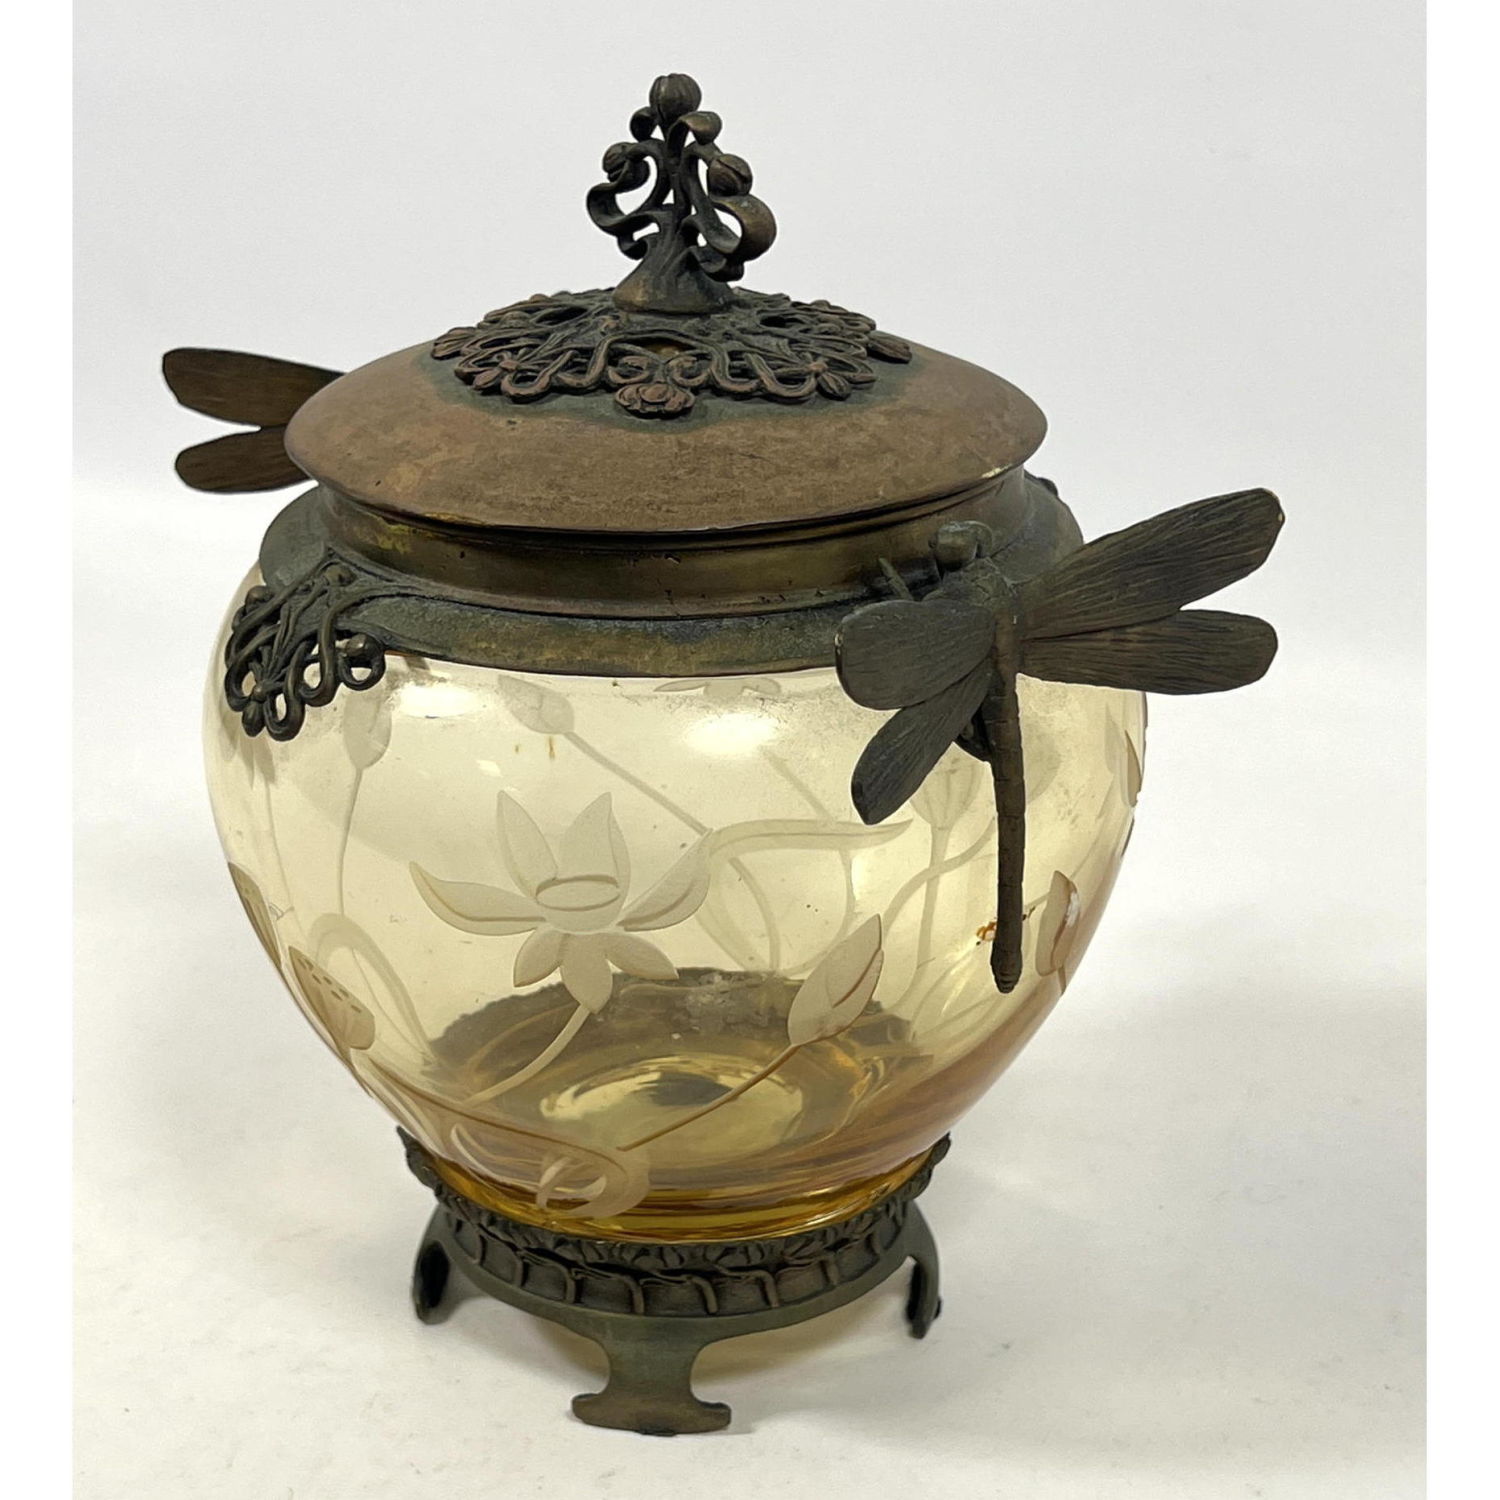 Decorative Etched Glass Lidded